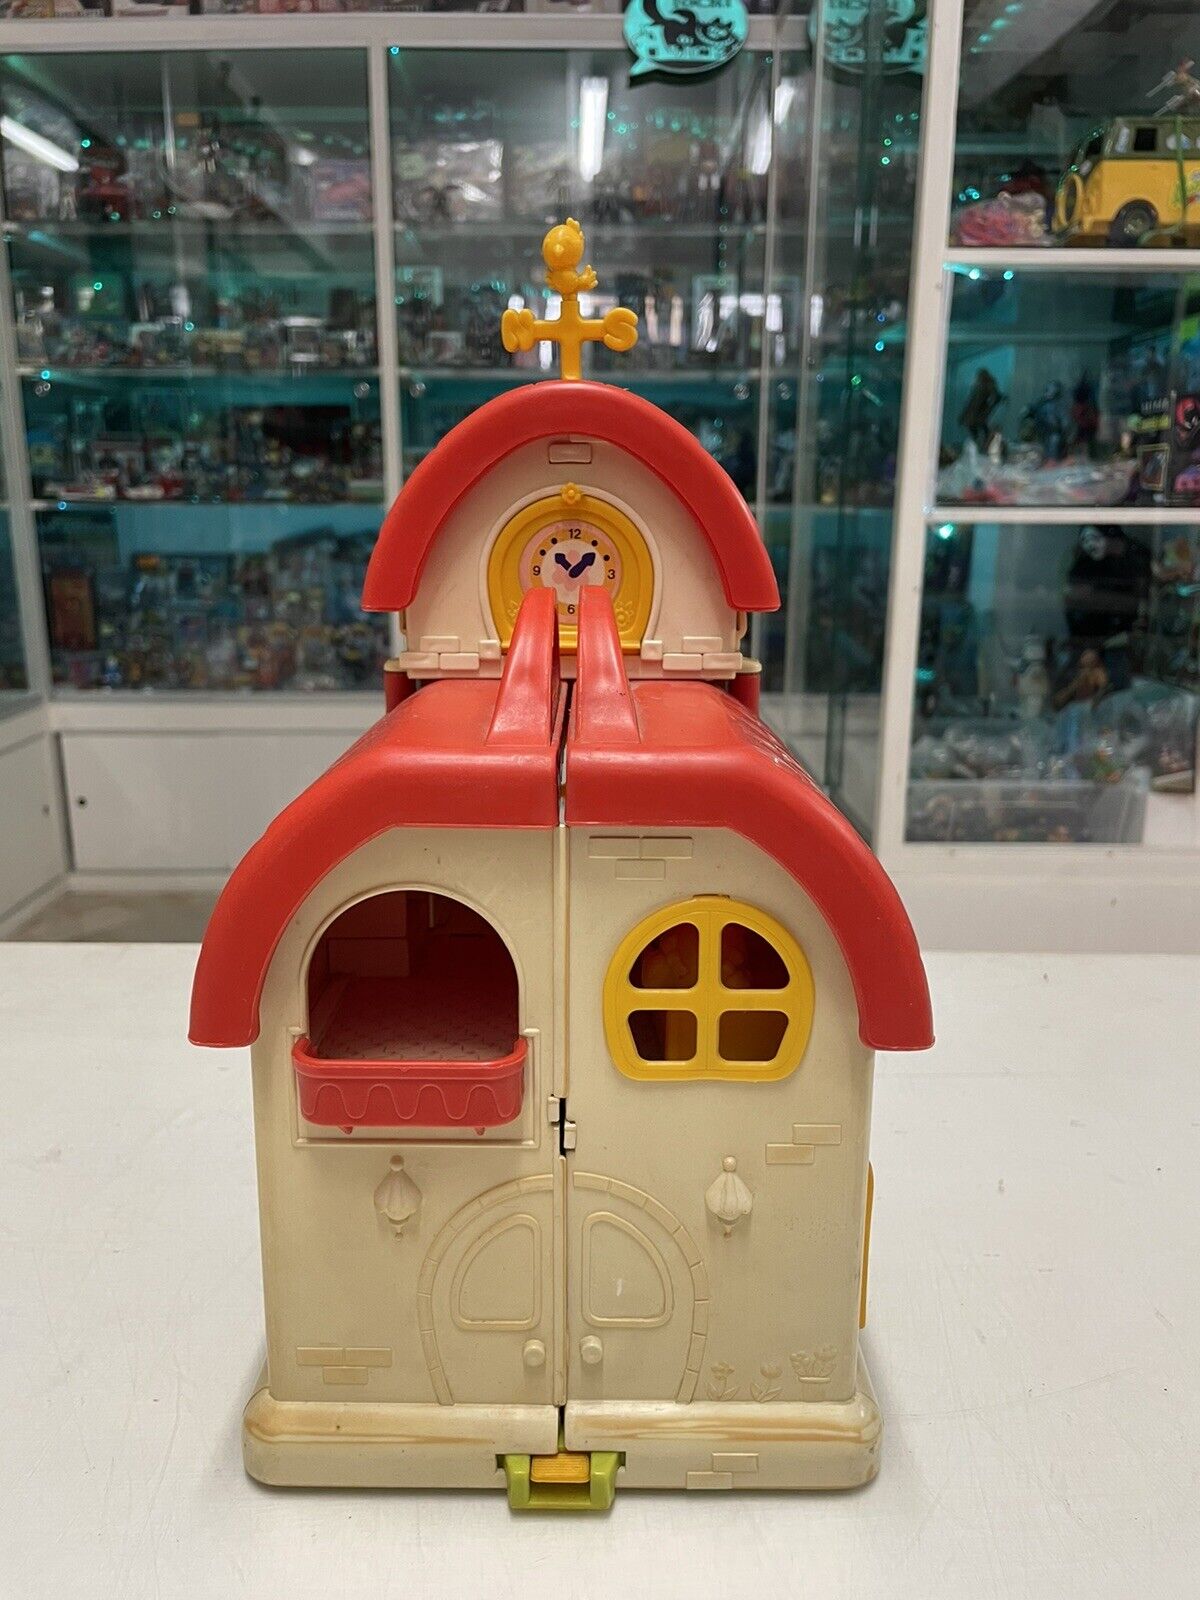 CANDY-CANDY-80s-Bandai-Japan-Casa-di-Pony-Pony-House-playset-Candys-House-134365887605-6